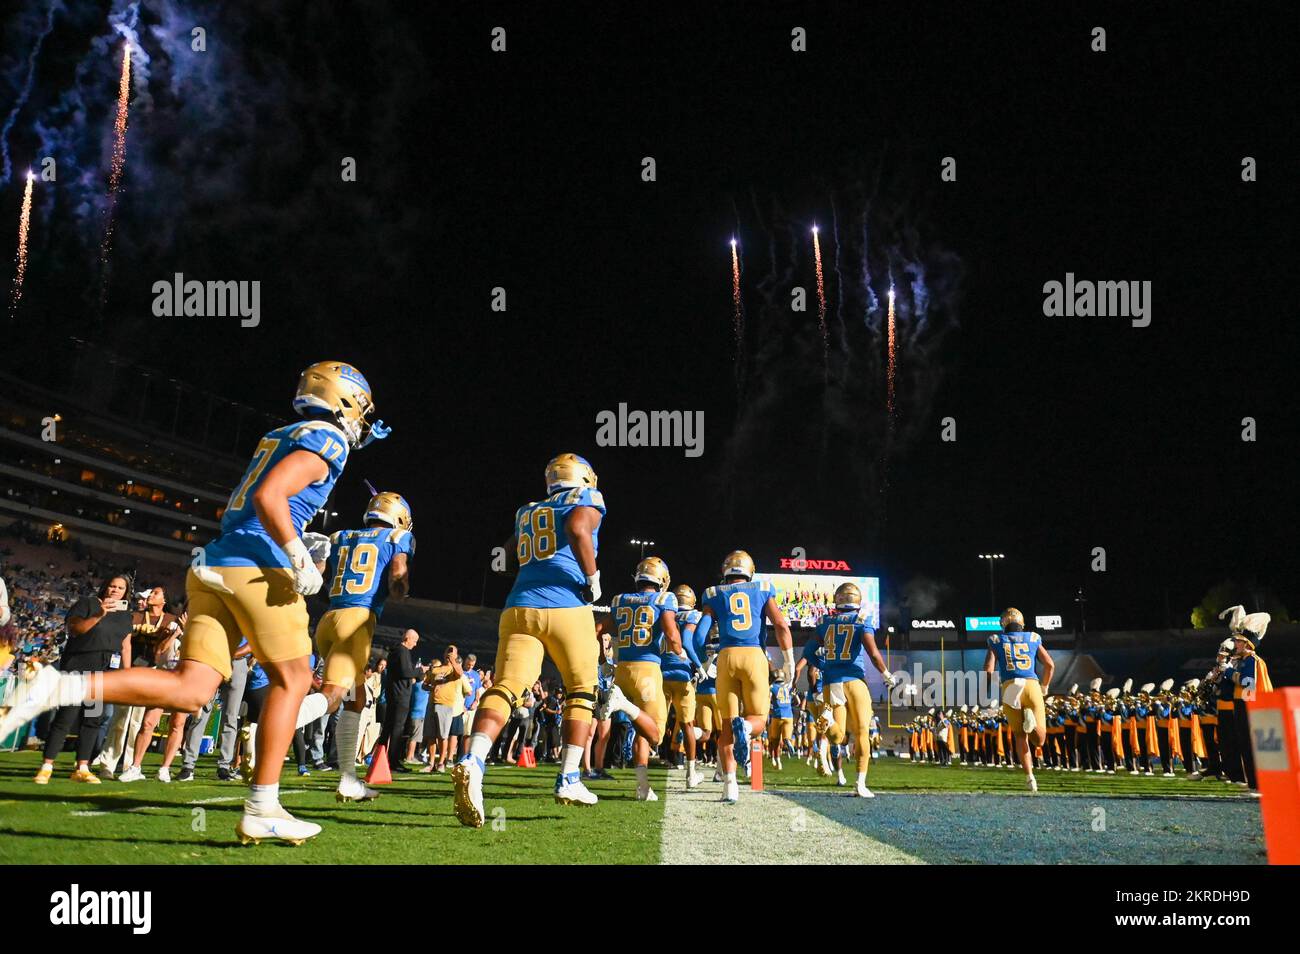 UCLA Bruins enter the field under fireworks during an NCAA football game against the Washington Huskies, Friday, Sep. 30, 2022, in Pasadena, Calif. Th Stock Photo